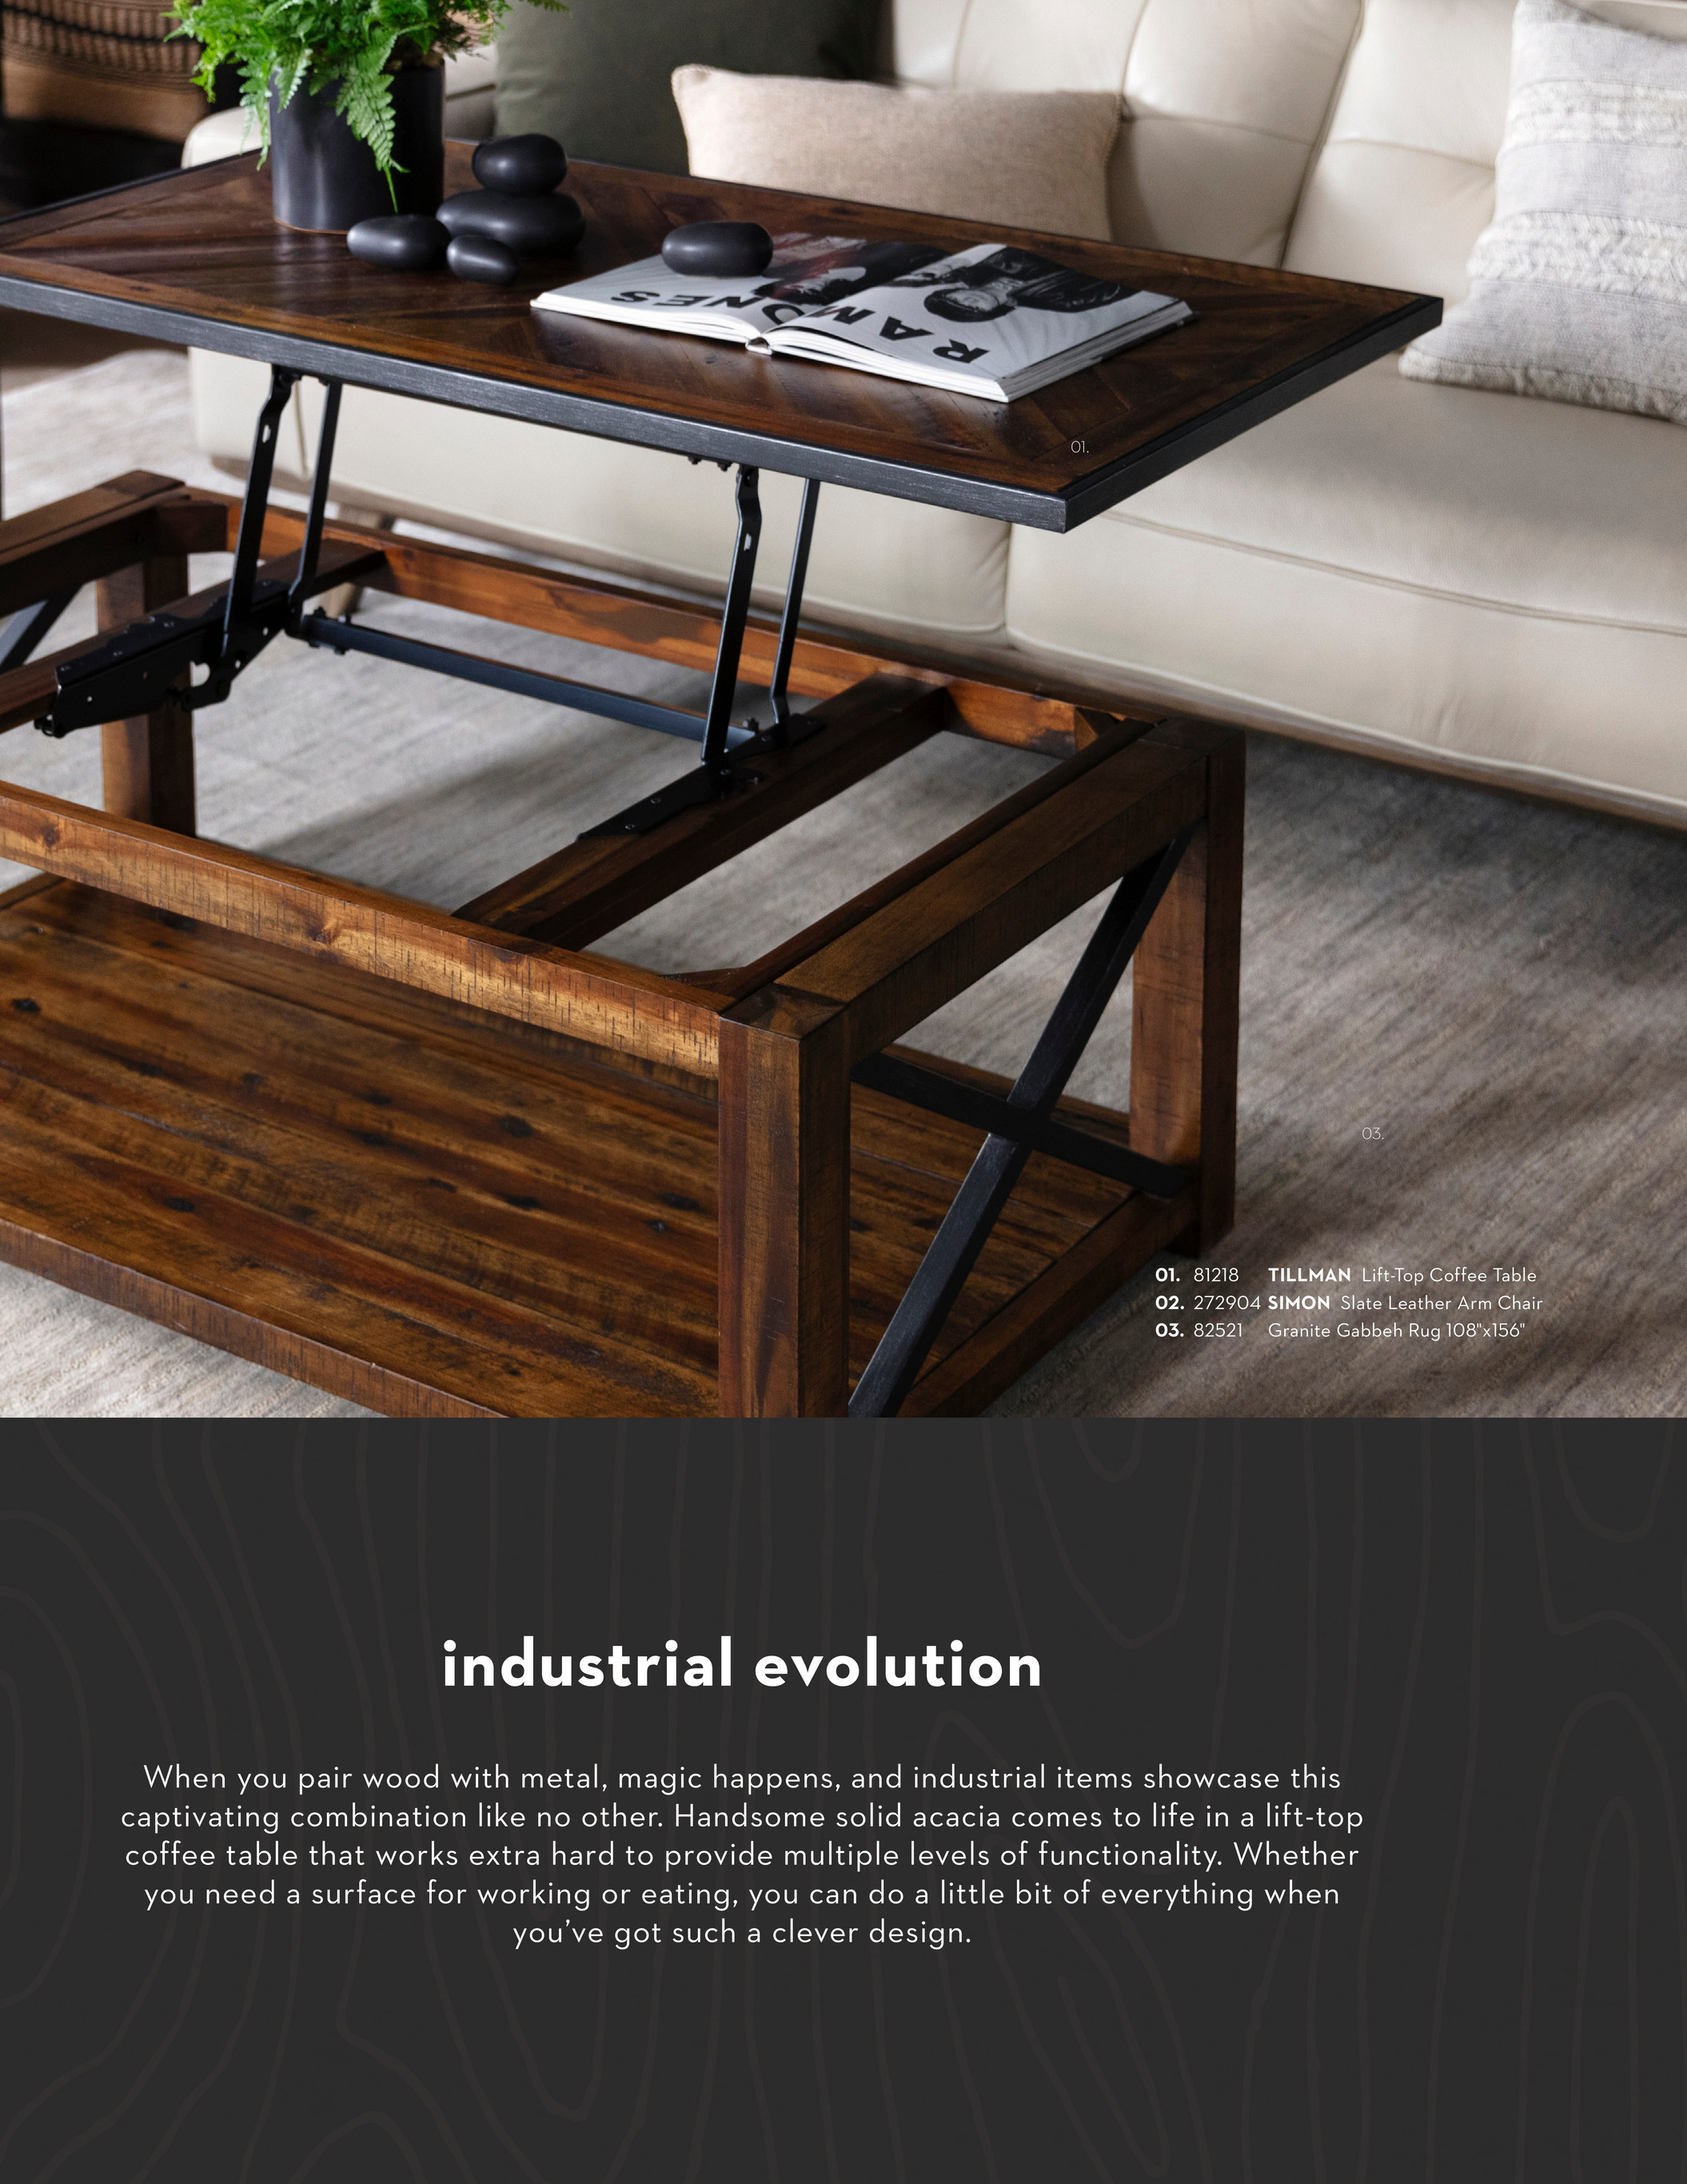 Wood Furniture Catalog 2021 - Tillman Lift-Top Coffee Table With Wheels -  Living Spaces